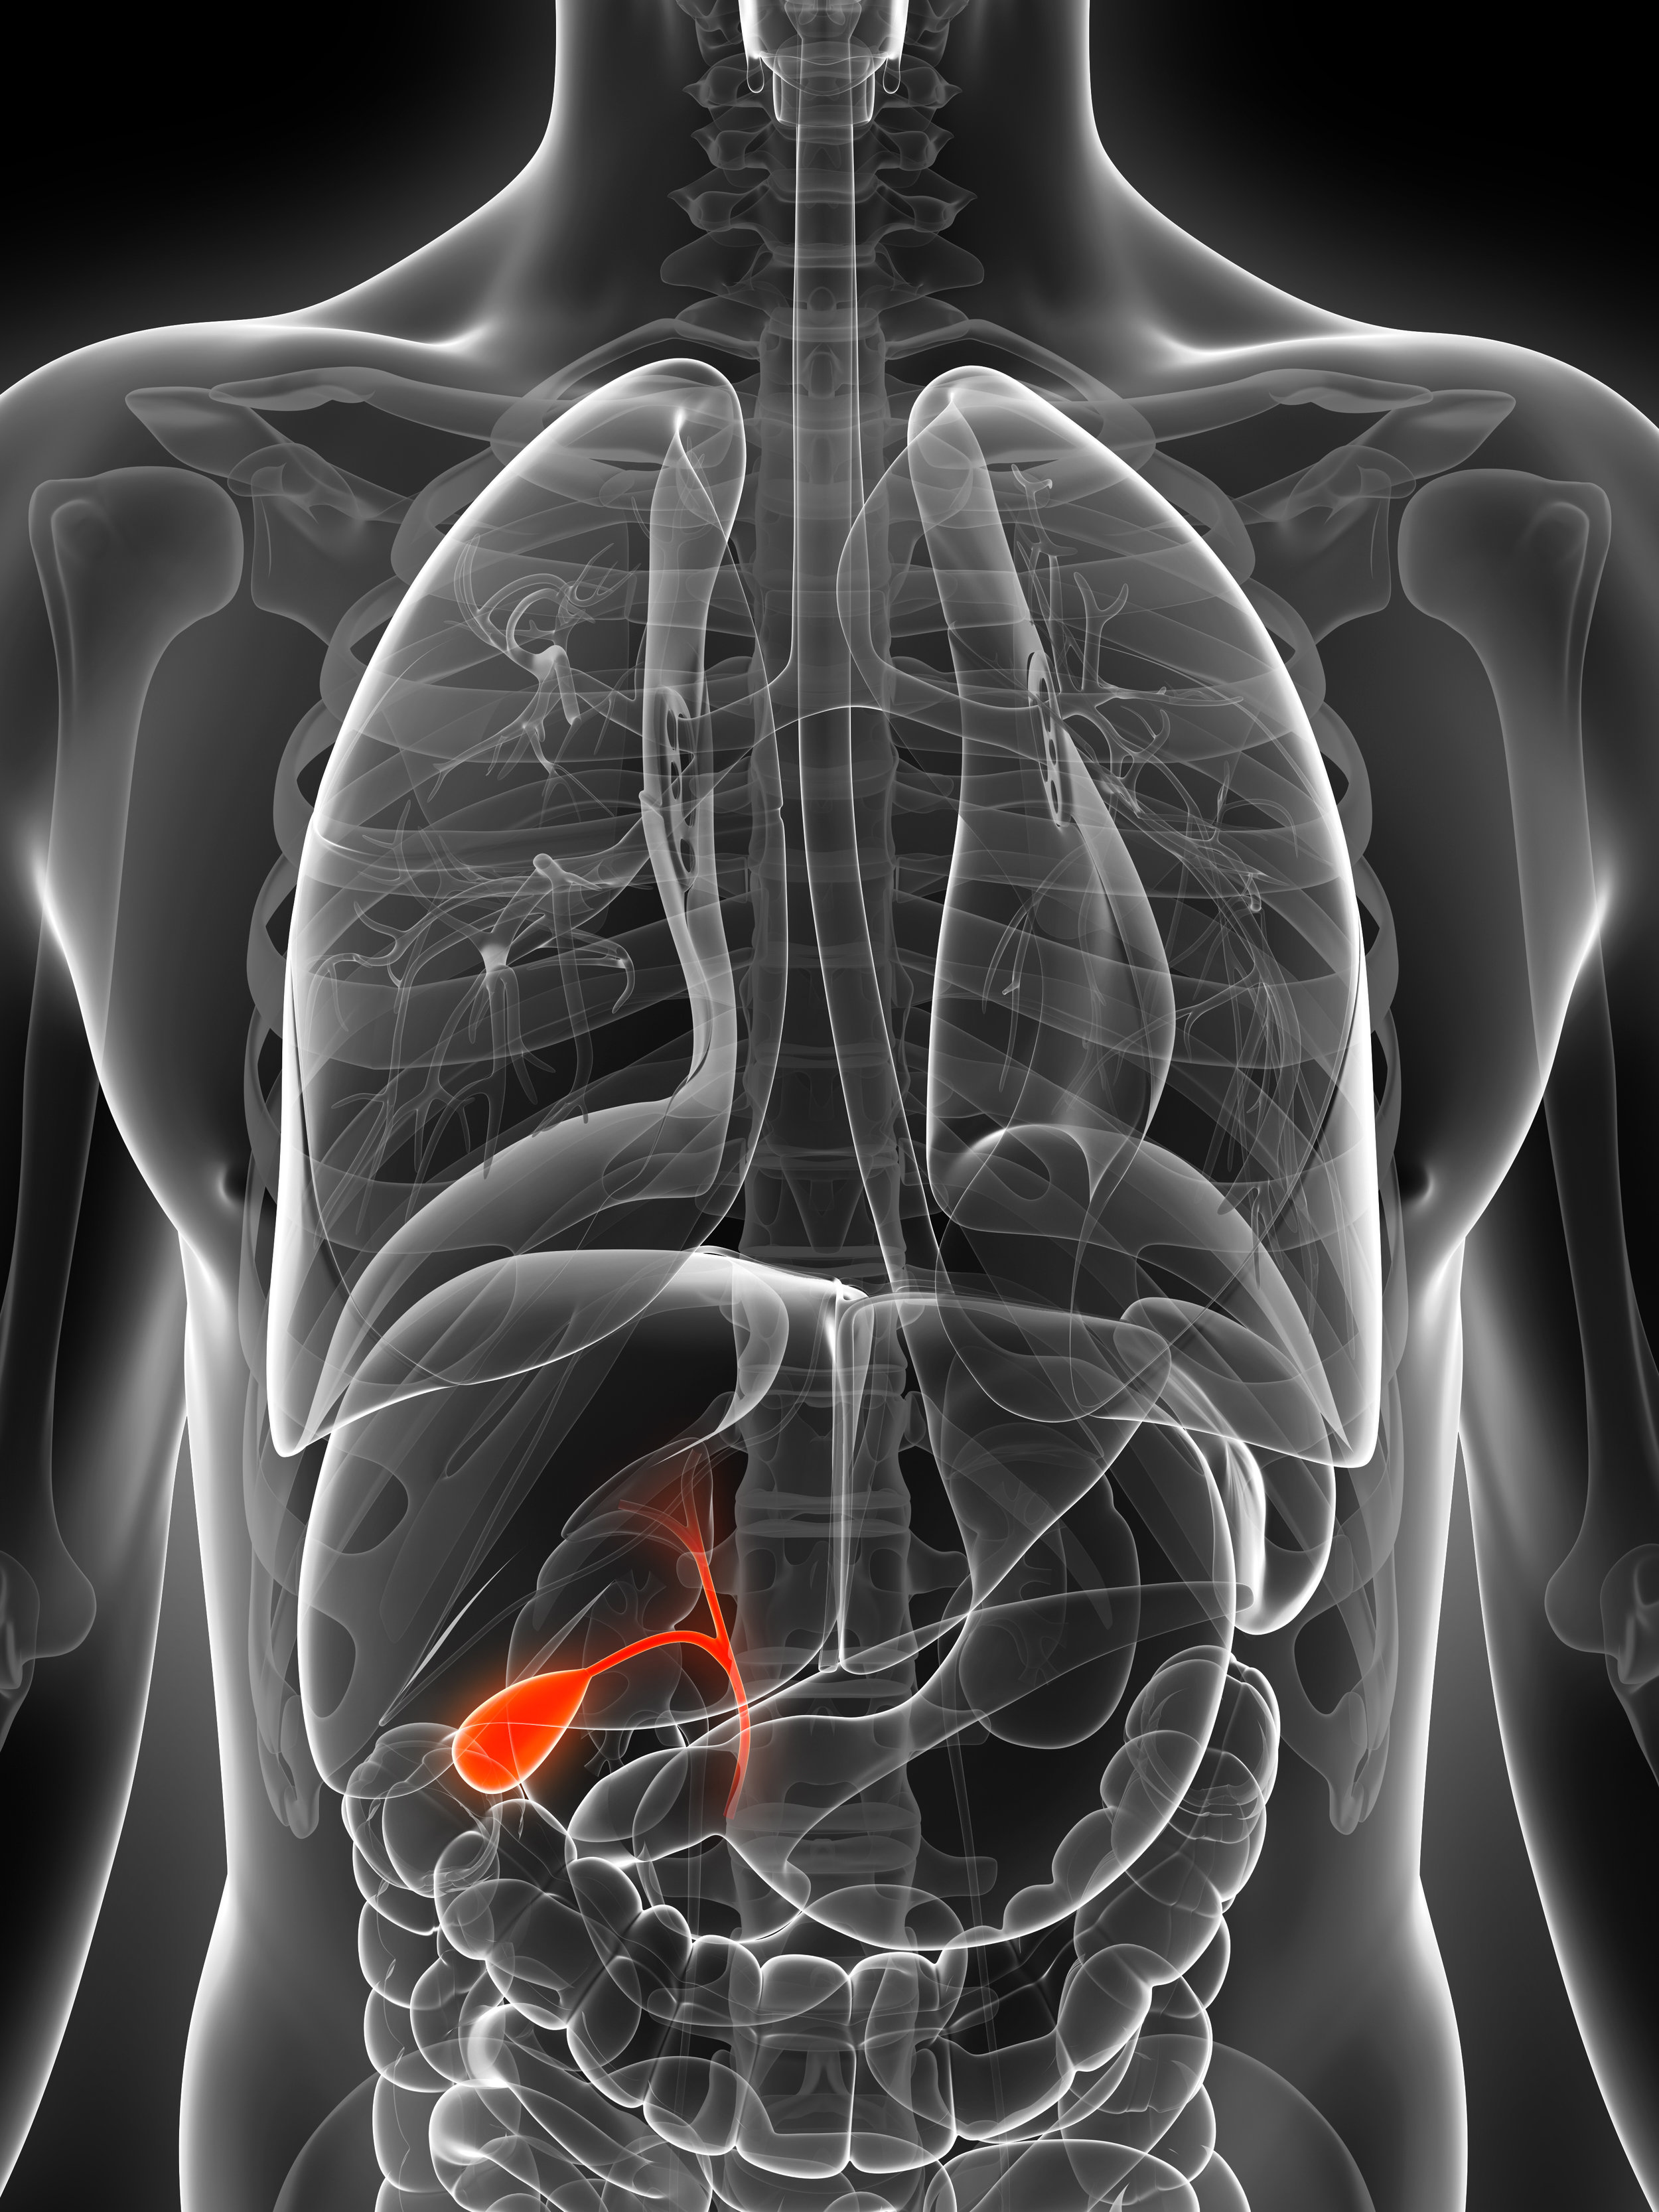 Gallbladder- Anatomy, Functions and Conditions